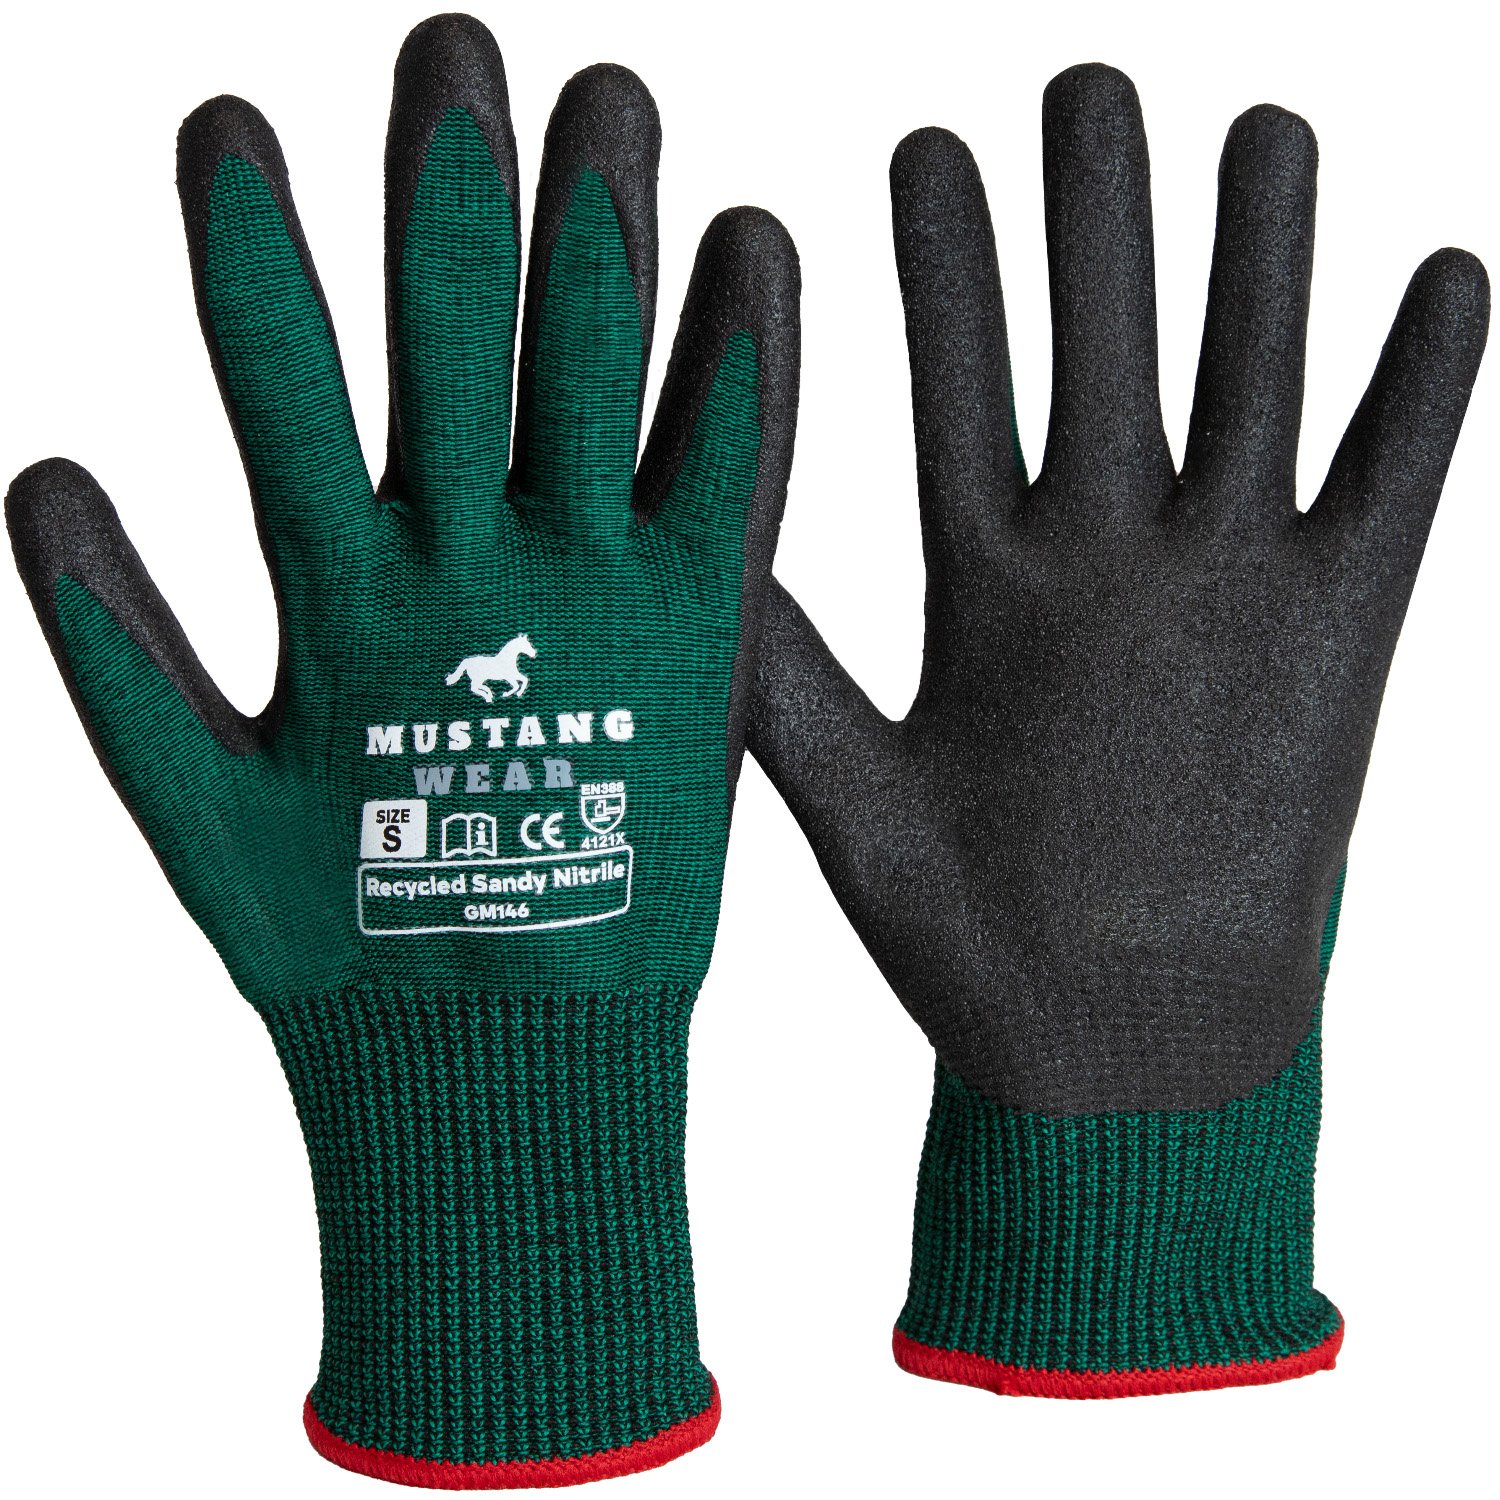 Mustang Wear Recycled Sandy Nitrile Palm Glove